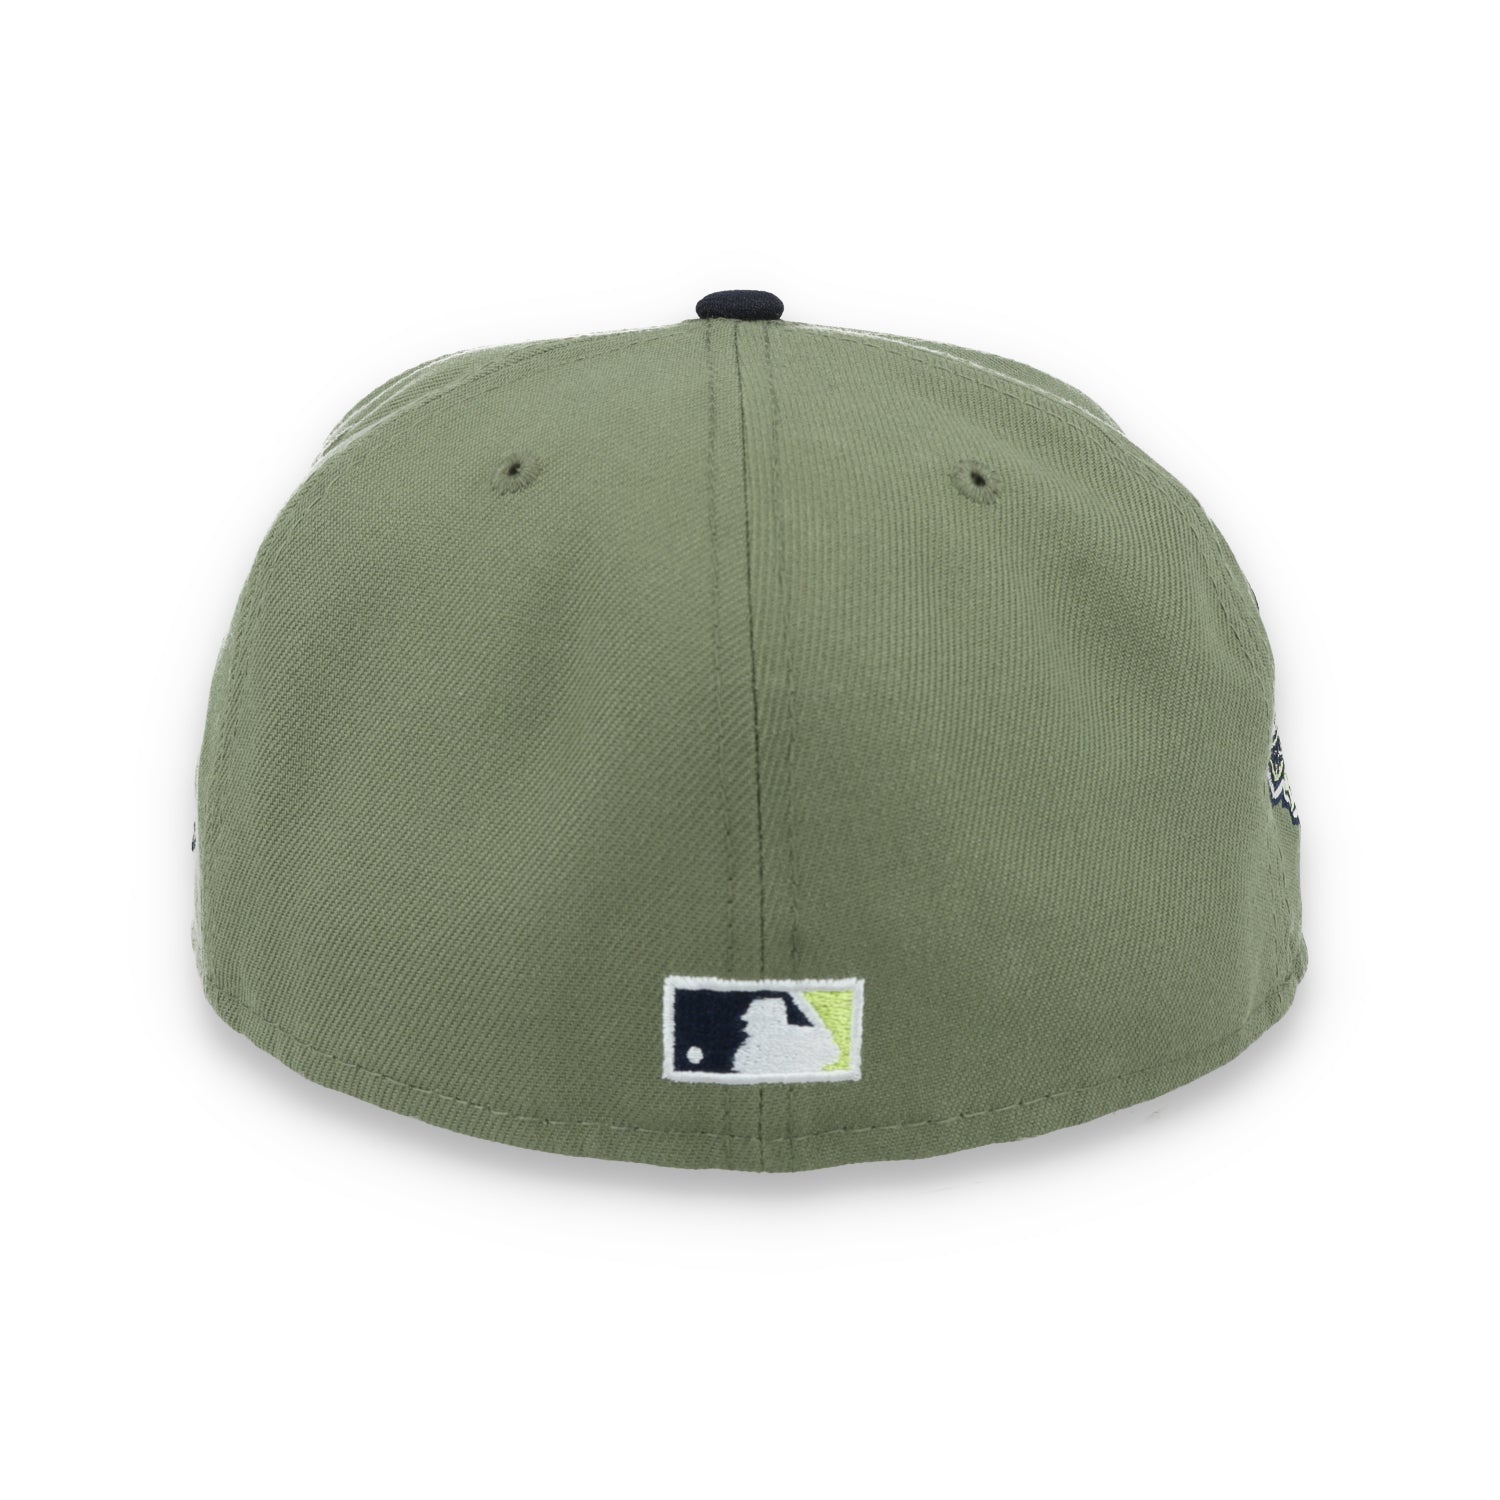 New Era New York Yankees 100th Anniversary Side Patch 59FIFTY Fitted Hat- Olive Green